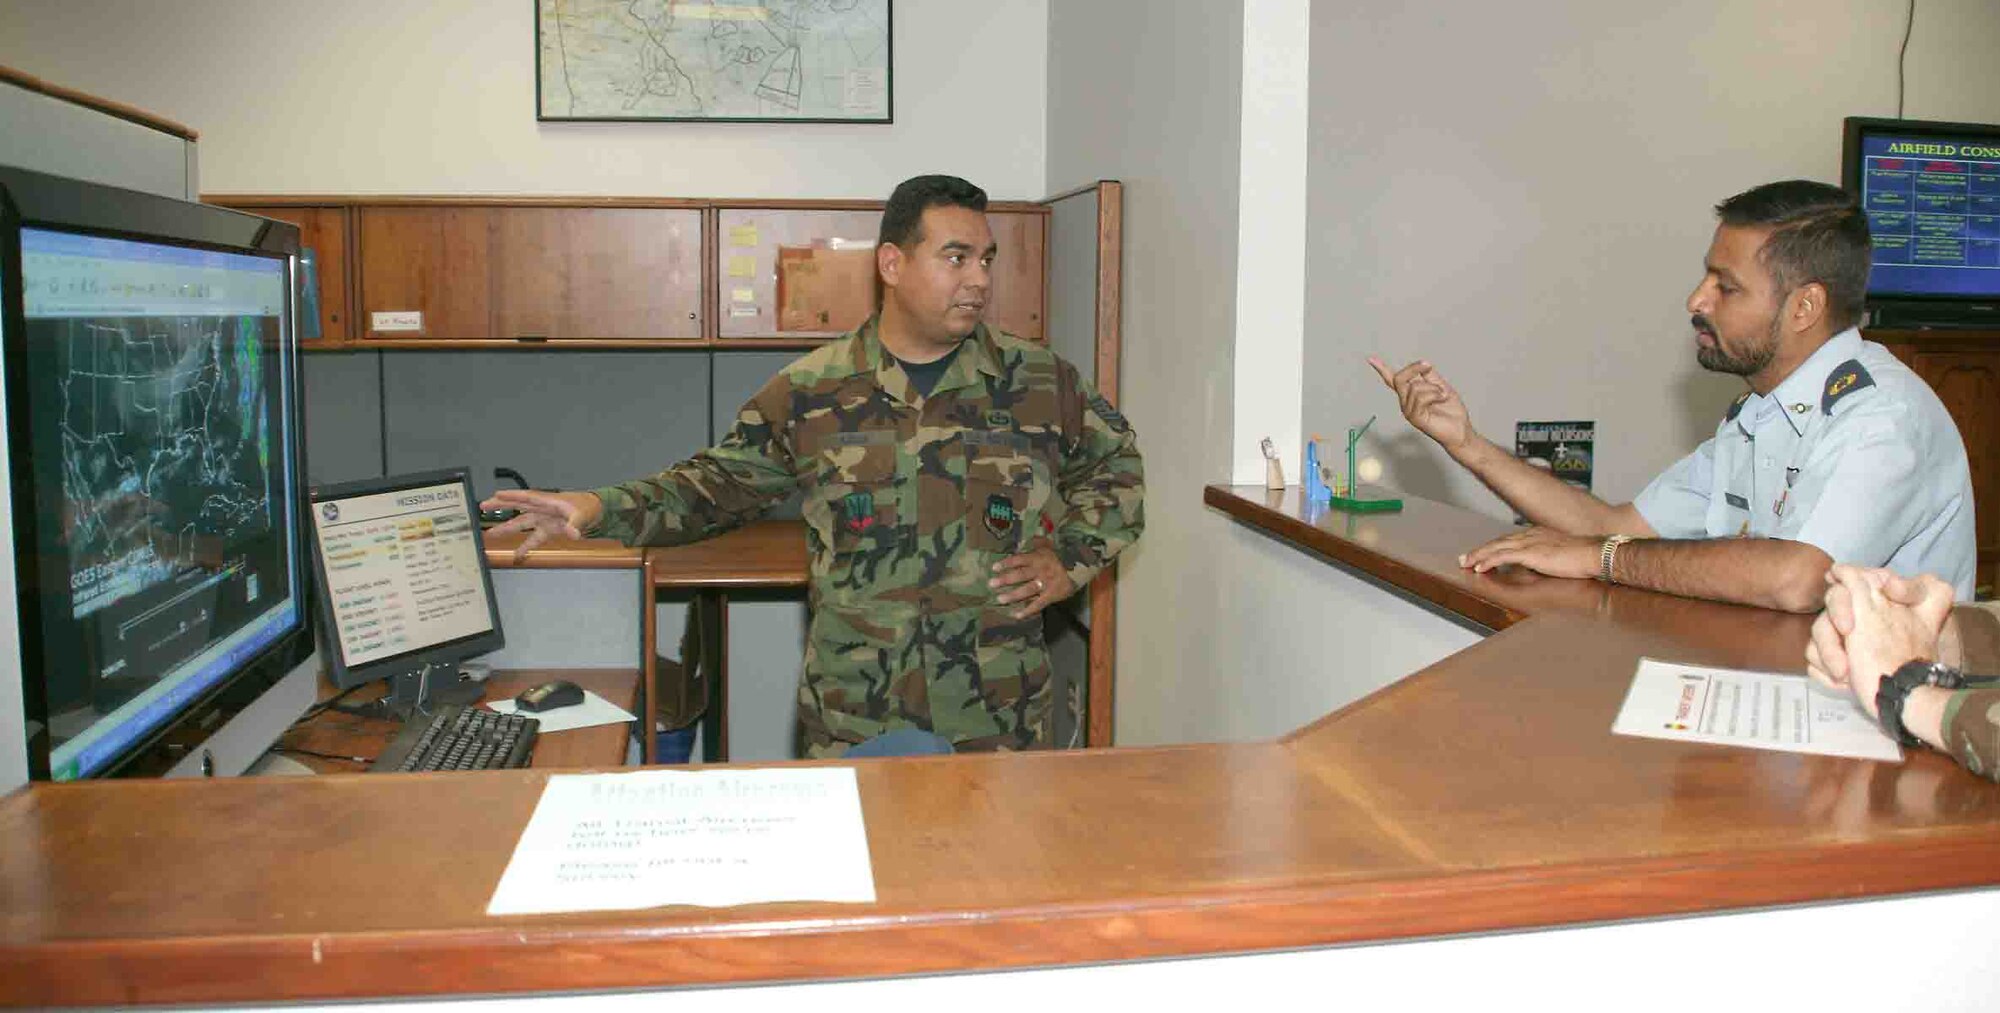 Tech. Sgt. Amado Azua (left), 20th Operational Support Squadron, trains Pakistani Air Force Maj. Muhammad Rehan Ashraf Oct. 12 how to provide weather support to combat weather teams. Maj. Ashraf was selected to be a weather squadron commander in Pakistan and is sponsored by the U.S. Air Force to obtain meteorological training from Shaw and Keesler Air Force Base, Miss. (U.S. Air Force photo/Senior Airman John Gordinier)